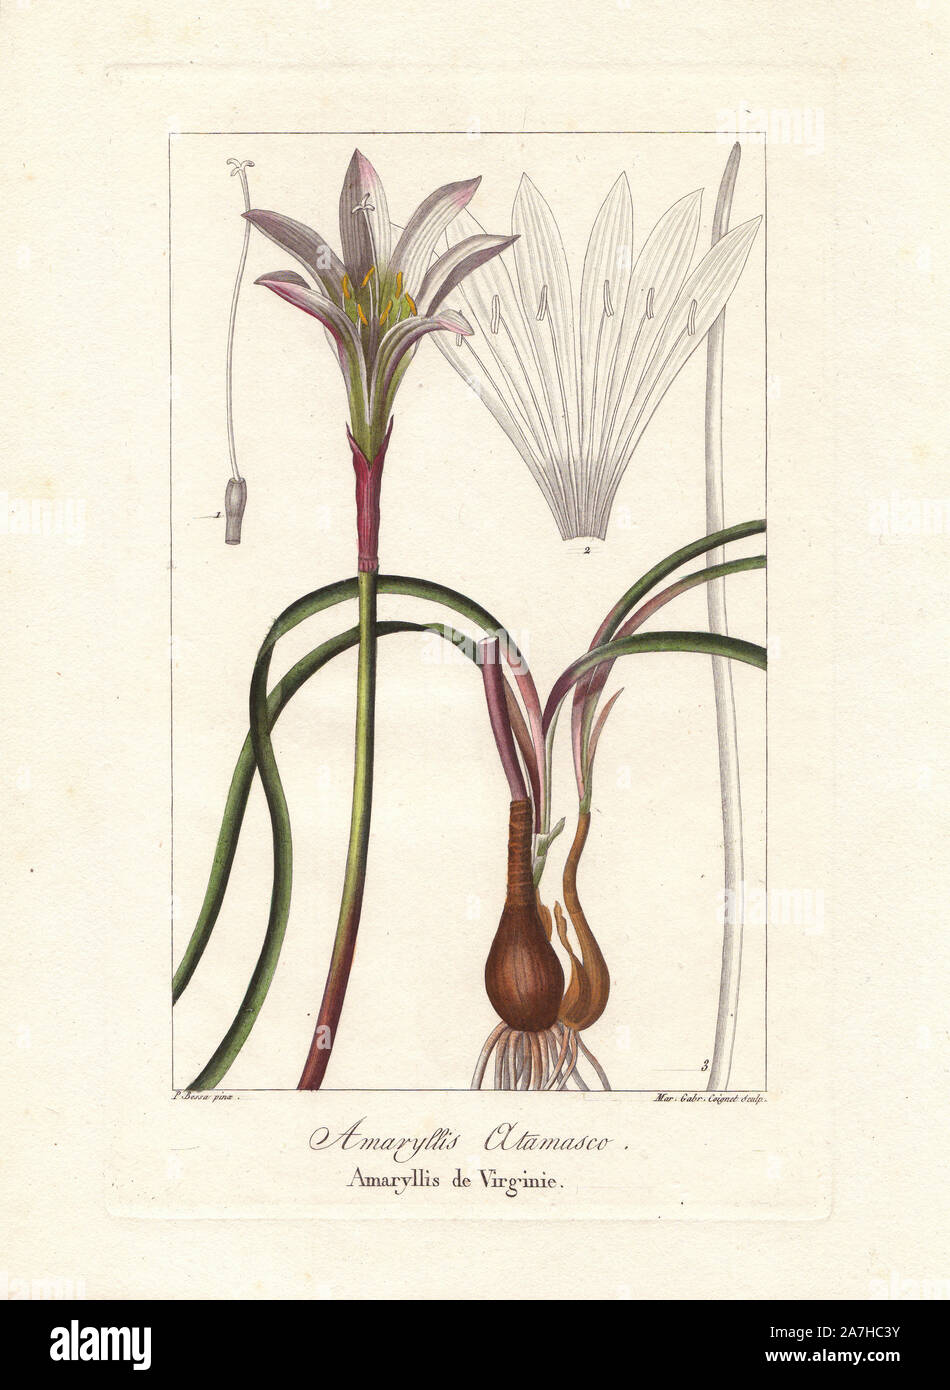 Atamasco lily, Zephryanthes atamasco, native to the eastern United States. Handcoloured stipple engraving on copper by Miss Marie Gabriel Coignet from a botanical illustration by Pancrace Bessa from Mordant de Launay's 'Herbier General de l'Amateur,' Audot, Paris, 1820. The Herbier was published from 1810 to 1827 and edited by Mordant de Launay and Loiseleur-Deslongchamps. Bessa (1772-1830s), along with Redoute and Turpin, is considered one of the greatest French botanical artists of the 19th century. The engraver Miss Coignet was born in Paris in 1793, and studied under Naigeon and Massard. Stock Photo